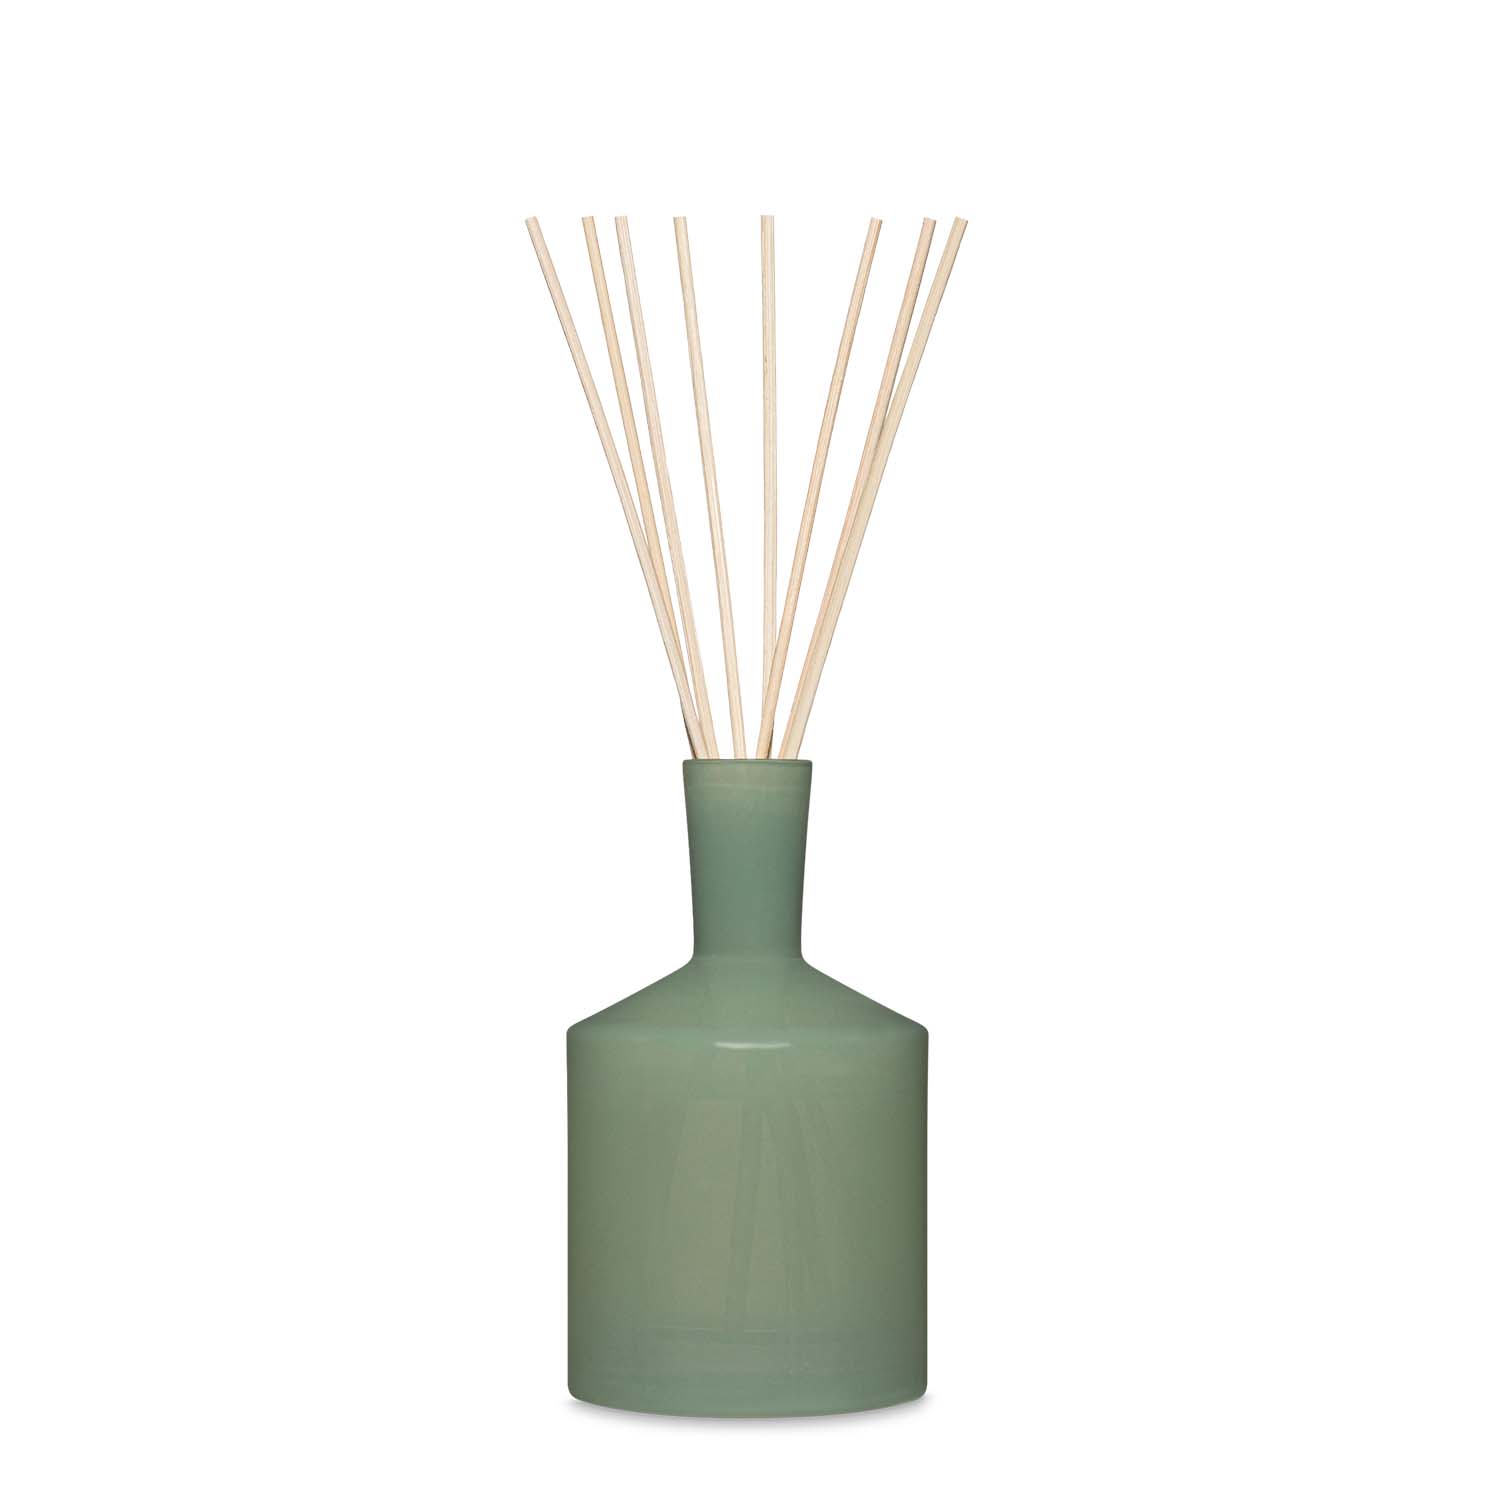 LOVSPA White Gardenia Reed Diffuser Oil Refill with Replacement Reed Sticks  